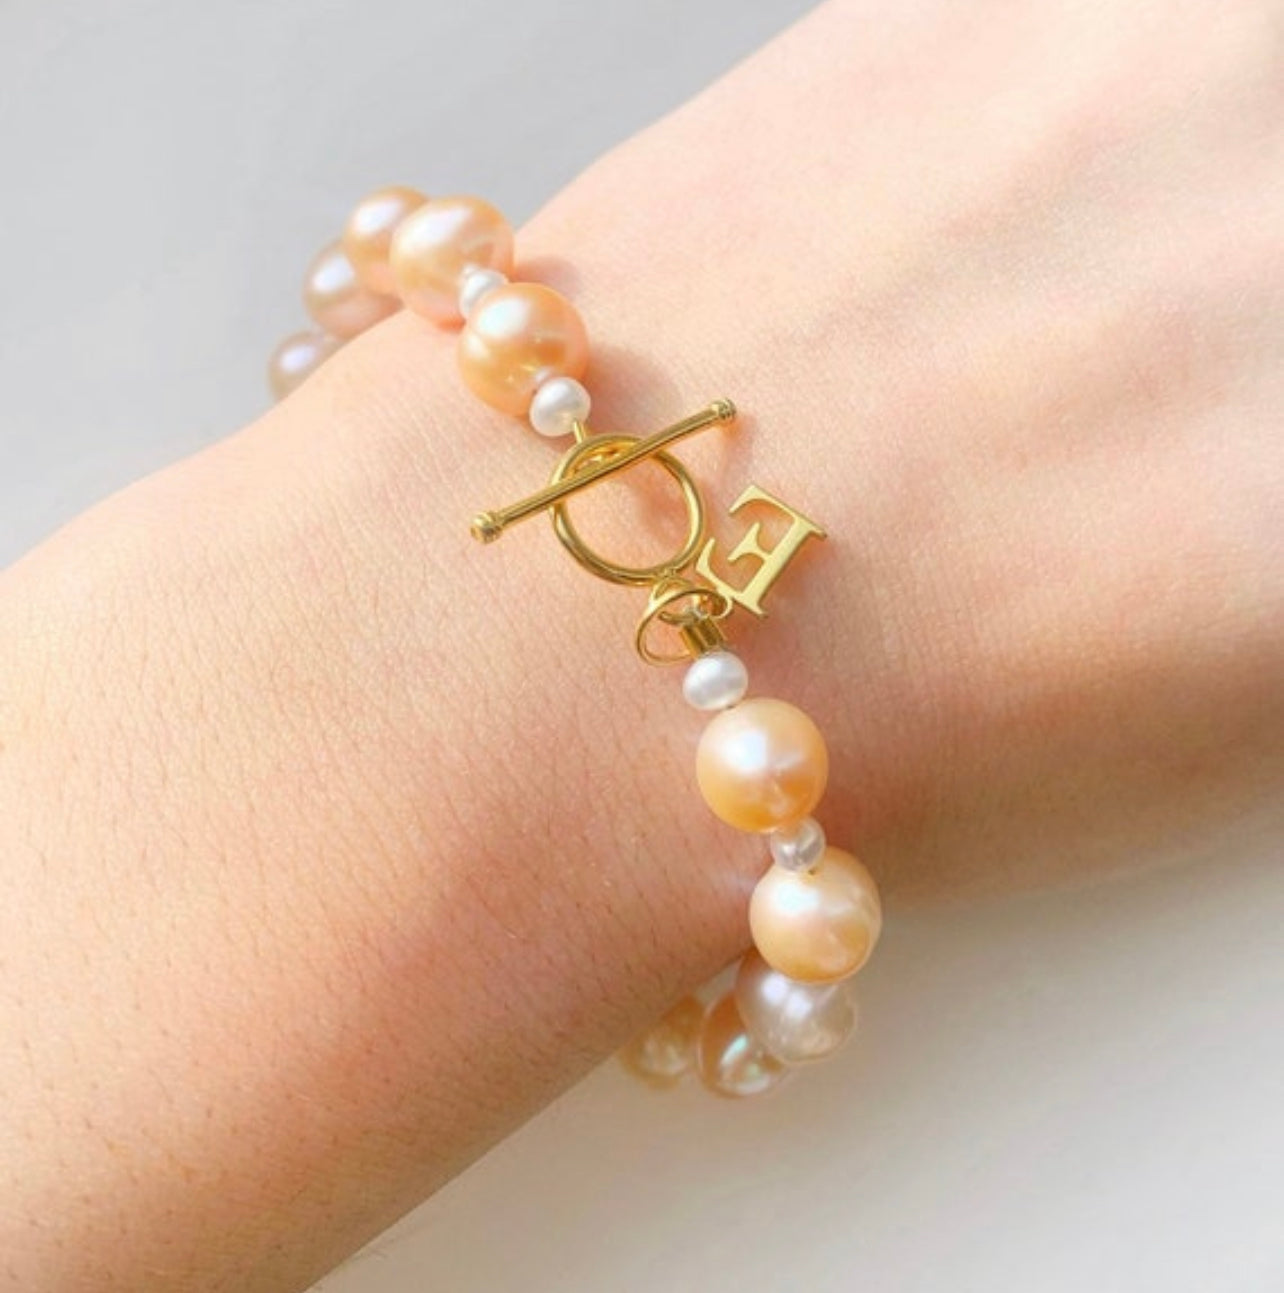 Letter charm bracelet, freshwater peach pearl bracelet with gold vermeil clasp and initial letter charm, personalized jewelry gifts